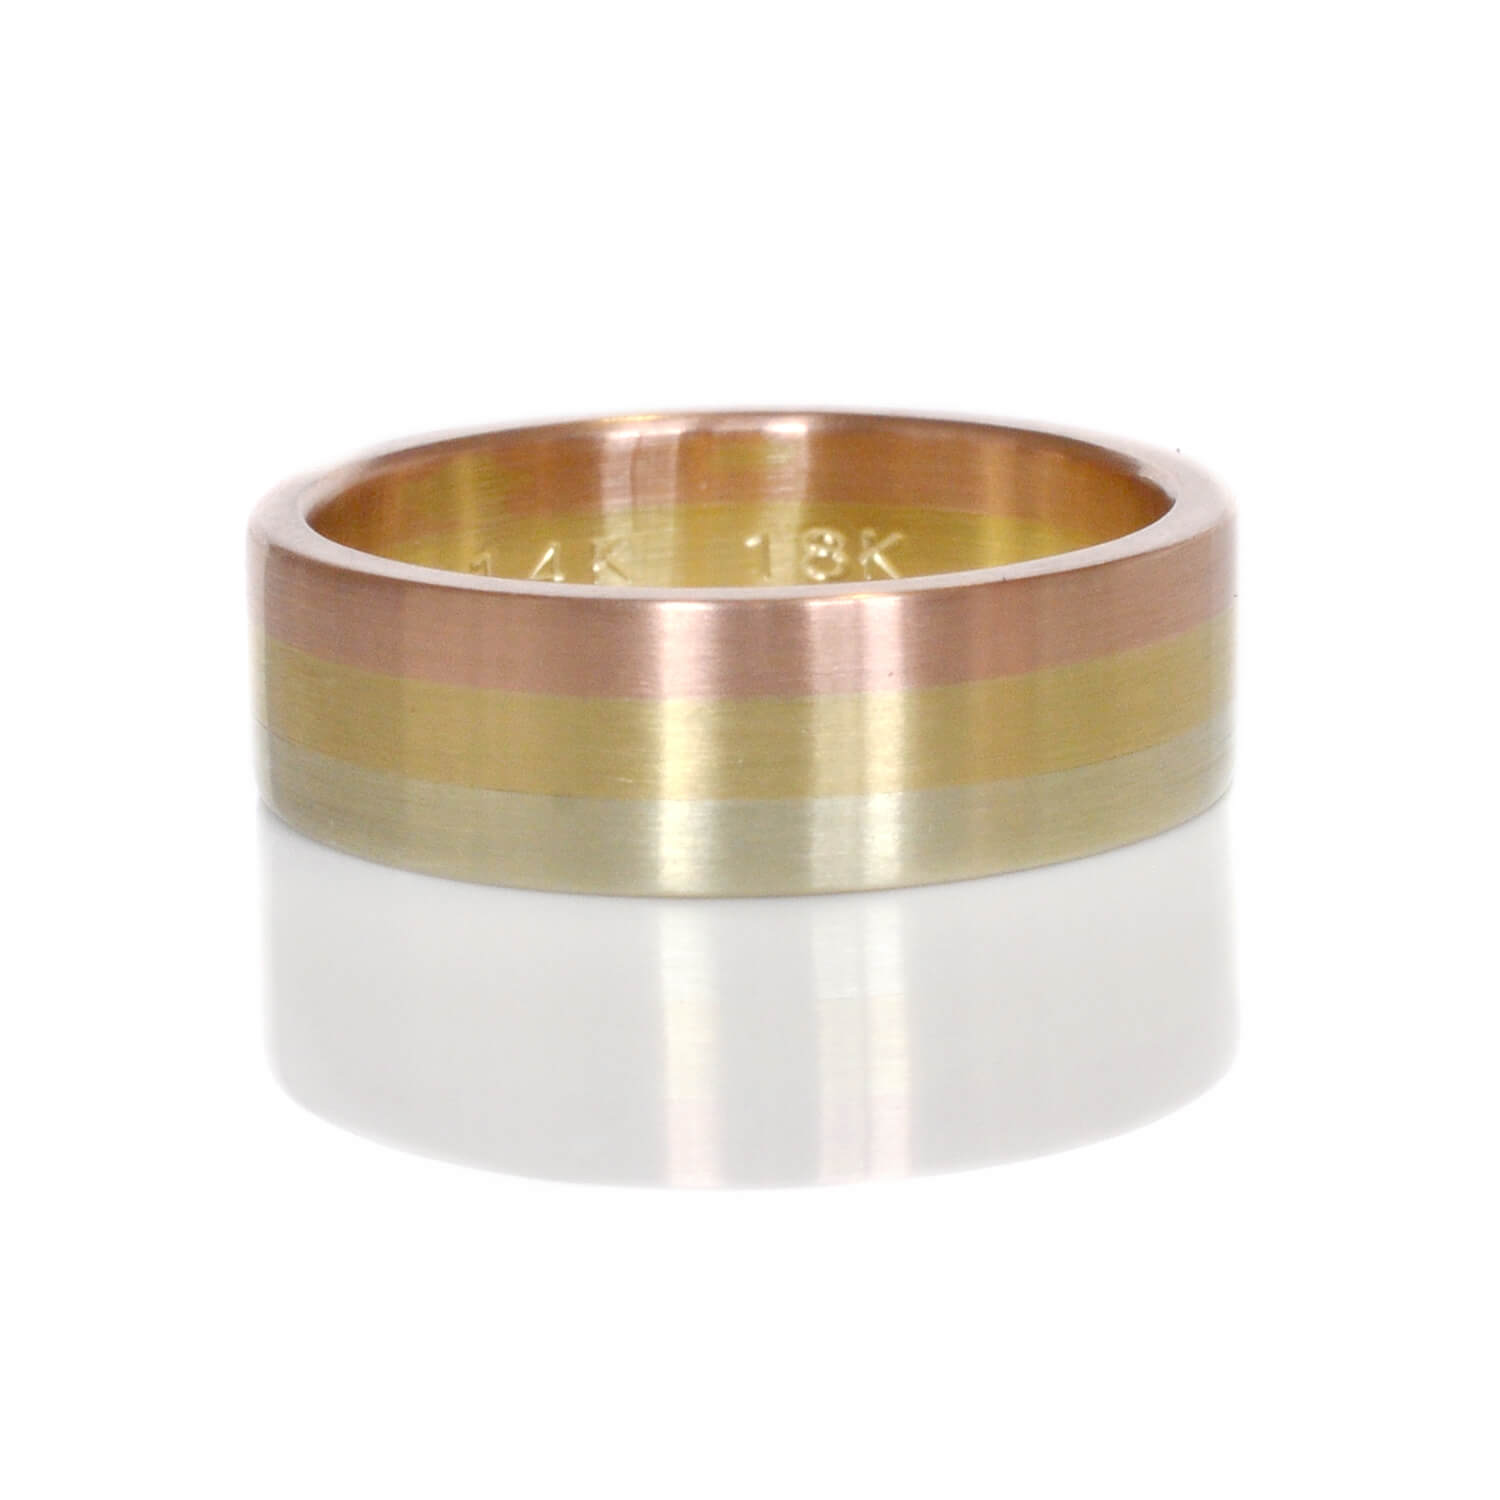 Handmade rainbow ring in mixed golds. Made by EC Design Studio using recycled red gold, yellow gold, and green gold.